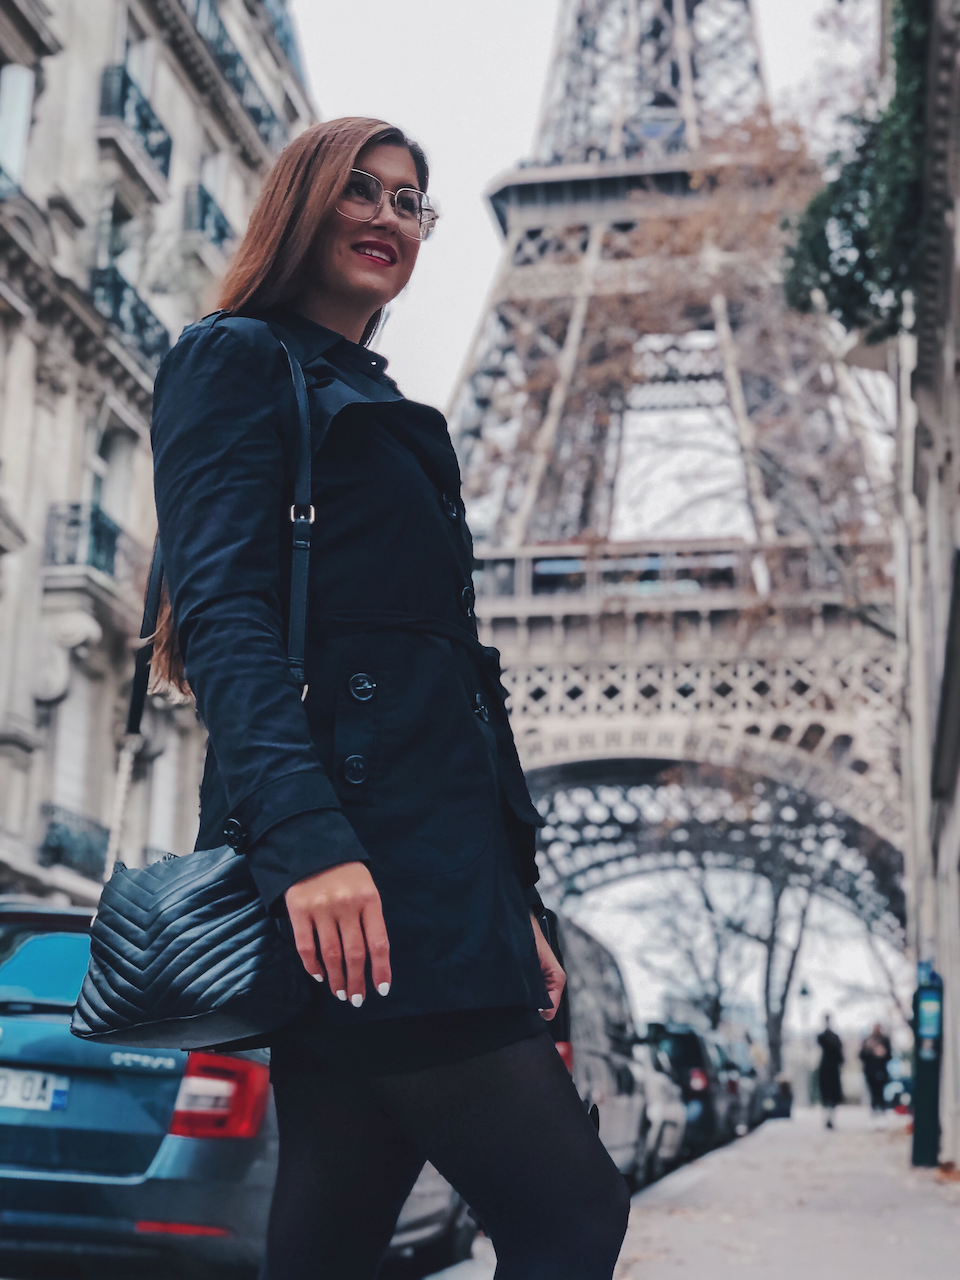 Woman posing in front of the Eiffel Tower - Paris - France